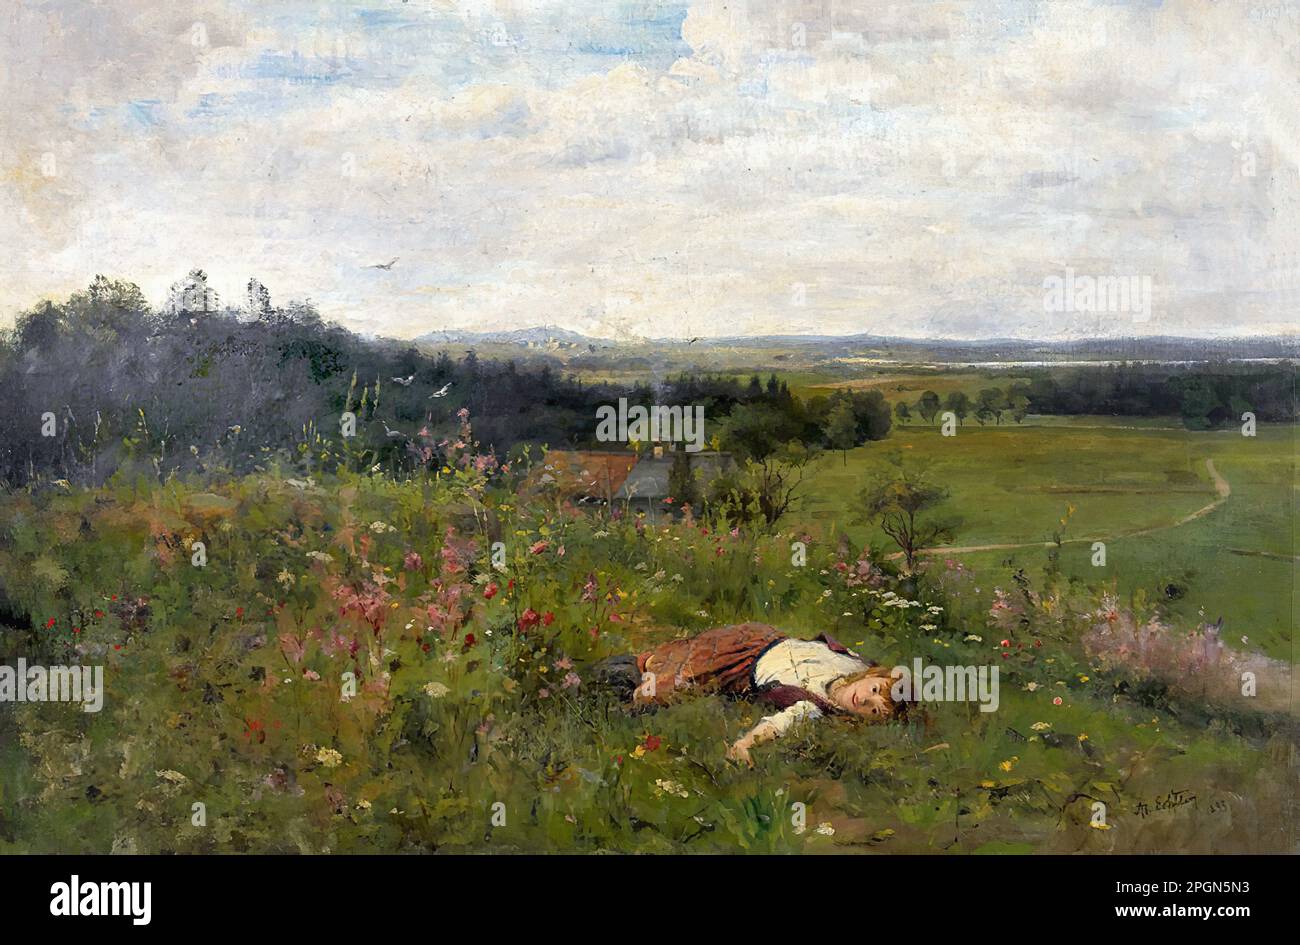 Echtler Adolf - Young Girl On A Meadow - German School - 19th And Early 20th Century - Echtler Adolf - Junges MÃ¤dchen Auf Einer Wiese - German School - 19th and Early 20th Century Stock Photo